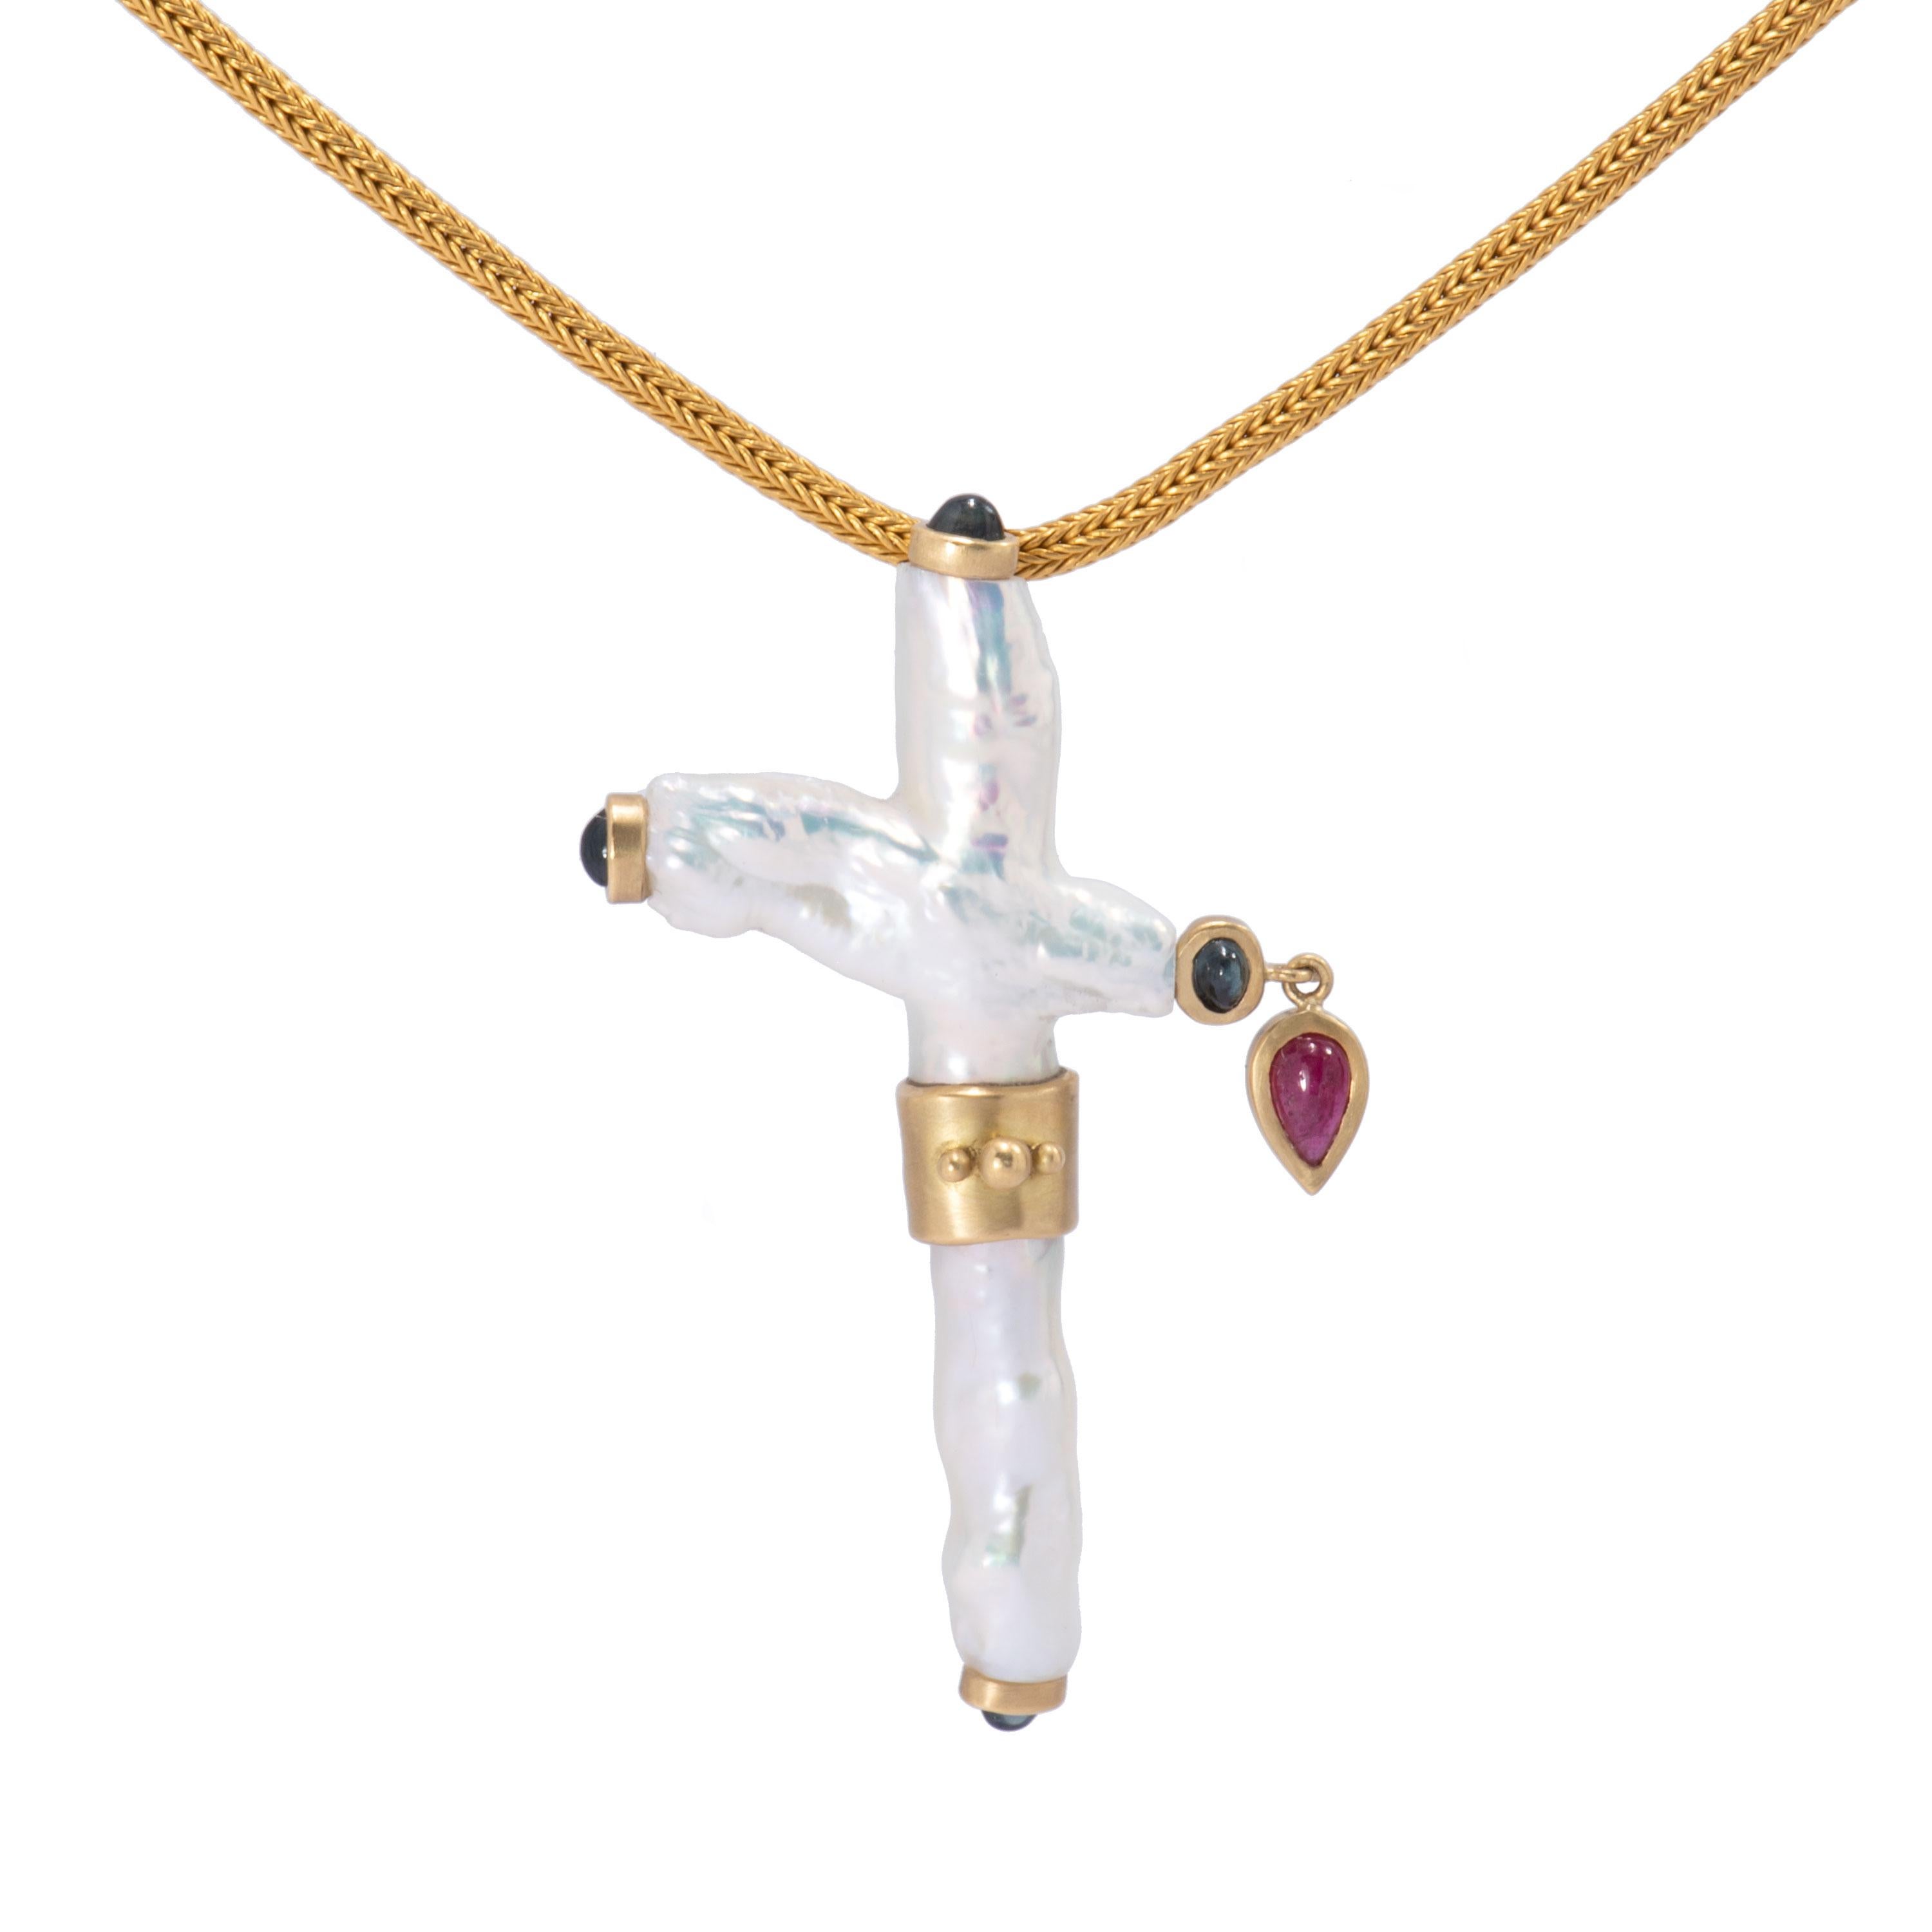 A naturally formed white pearl in the shape of a cross is bezel set in 18 karat gold with 4 deep blue sapphire cabochons at the 4 stations. A tear shaped ruby cabochon dangles from one station and an 18 karat gold beaded band encircles the center.